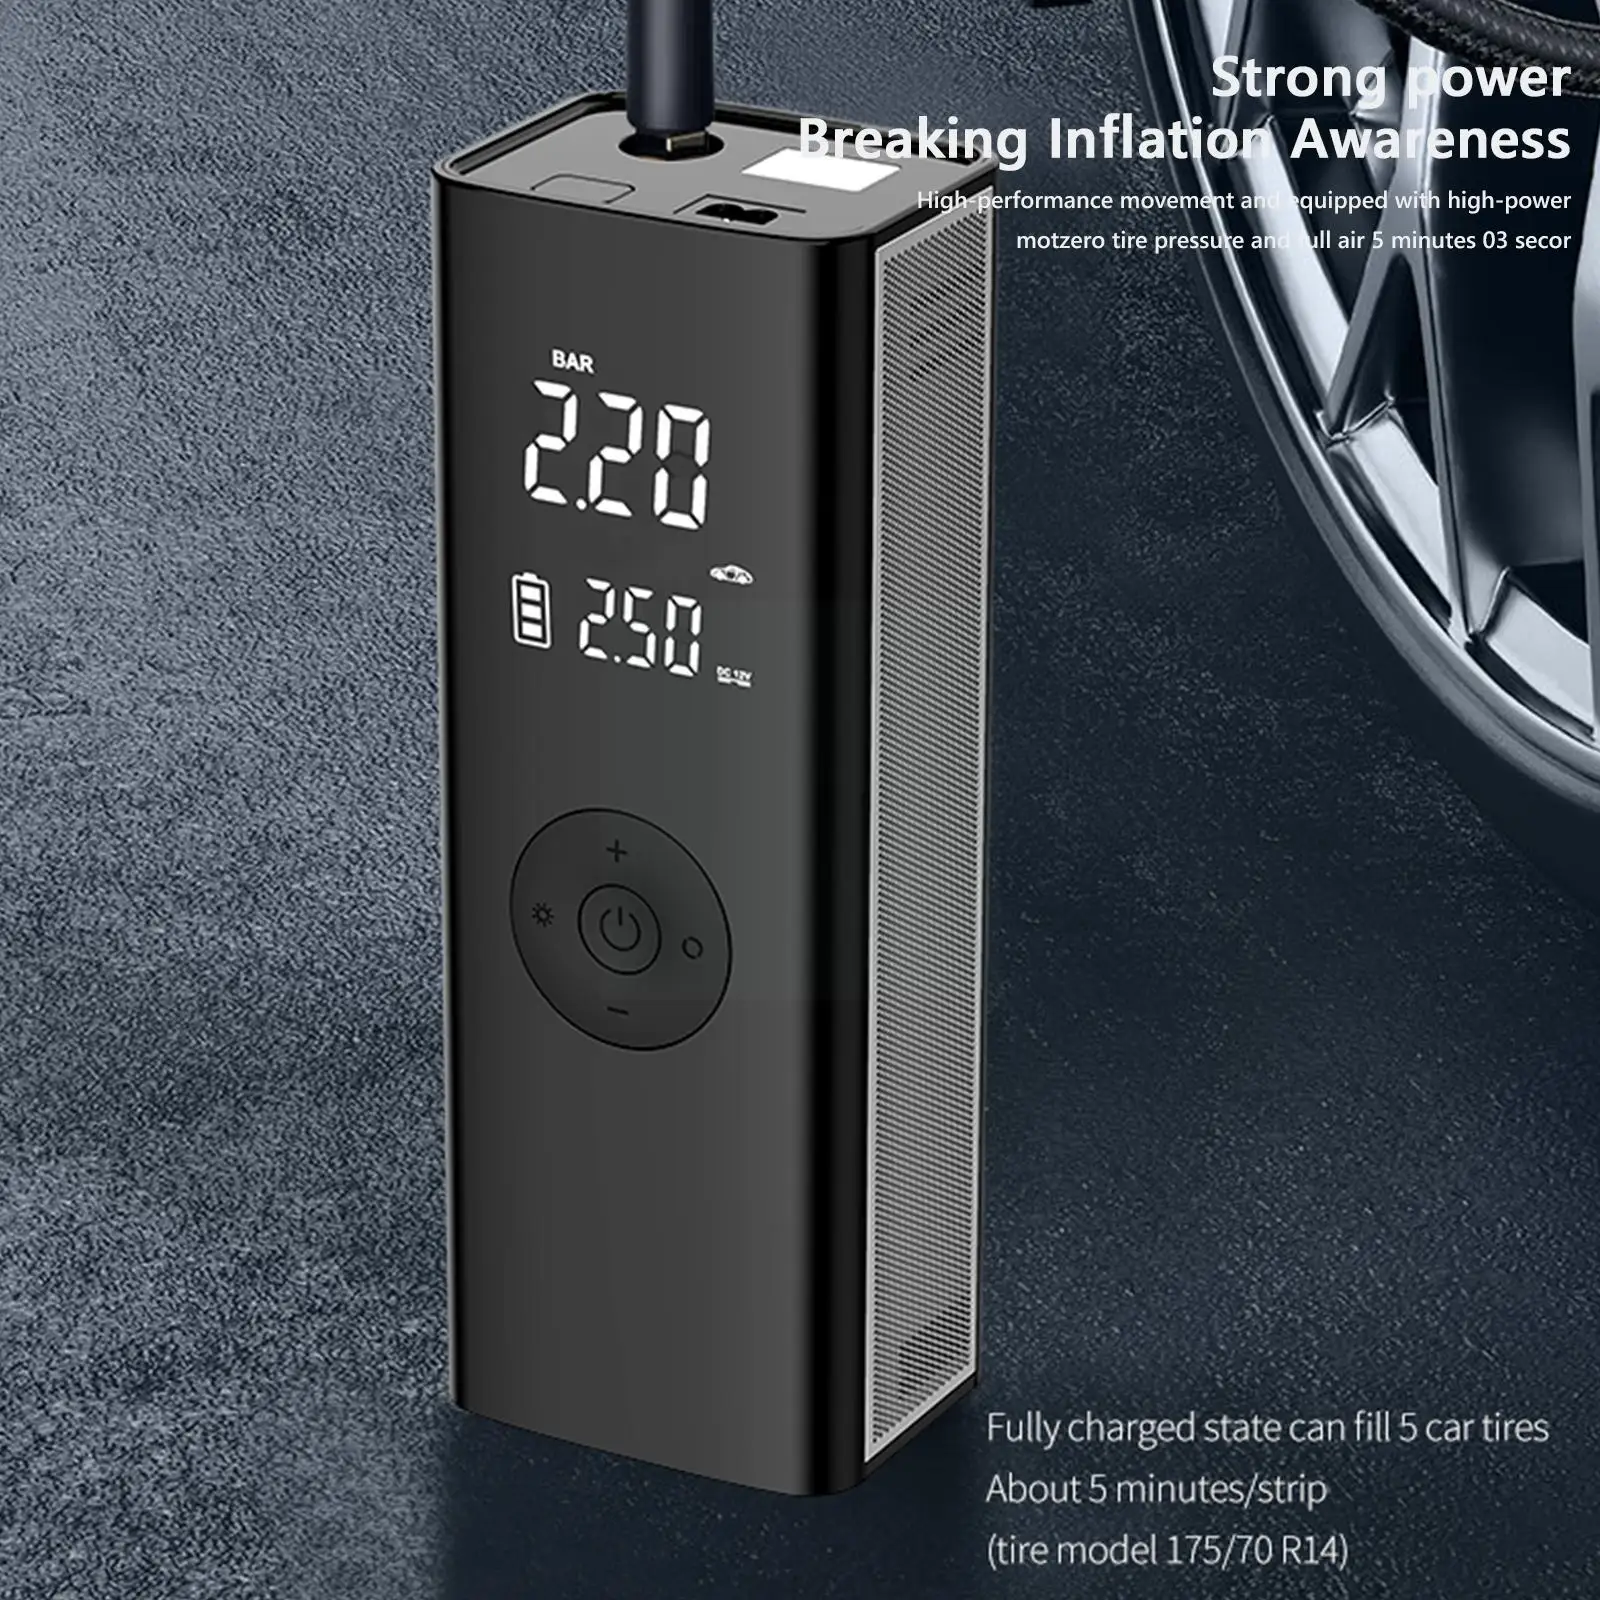 Air Compressor 6000mAh Air Pump For Car Portable Tyre Inflator Electric Motorcycle Pump Compressor For Car Motorcycles Bicy W1S0